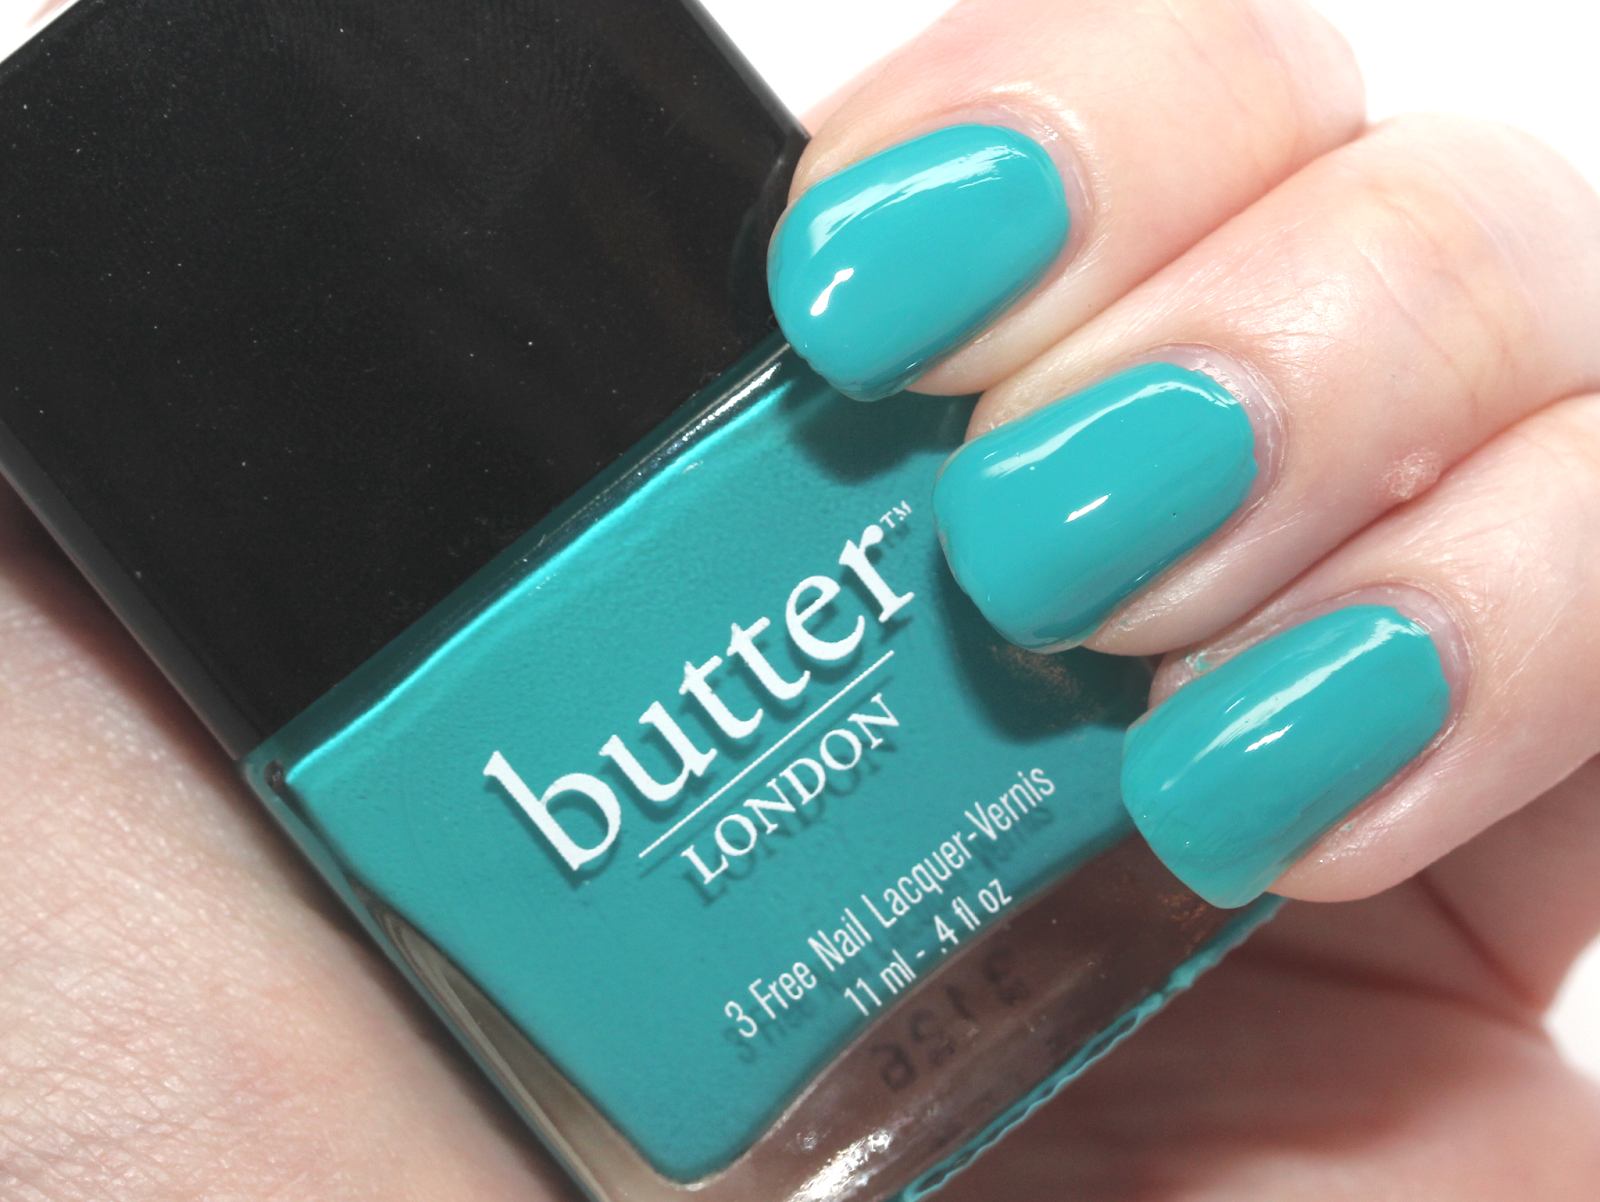 10. Butter London Nail Lacquer in "Cotton Buds" - wide 3